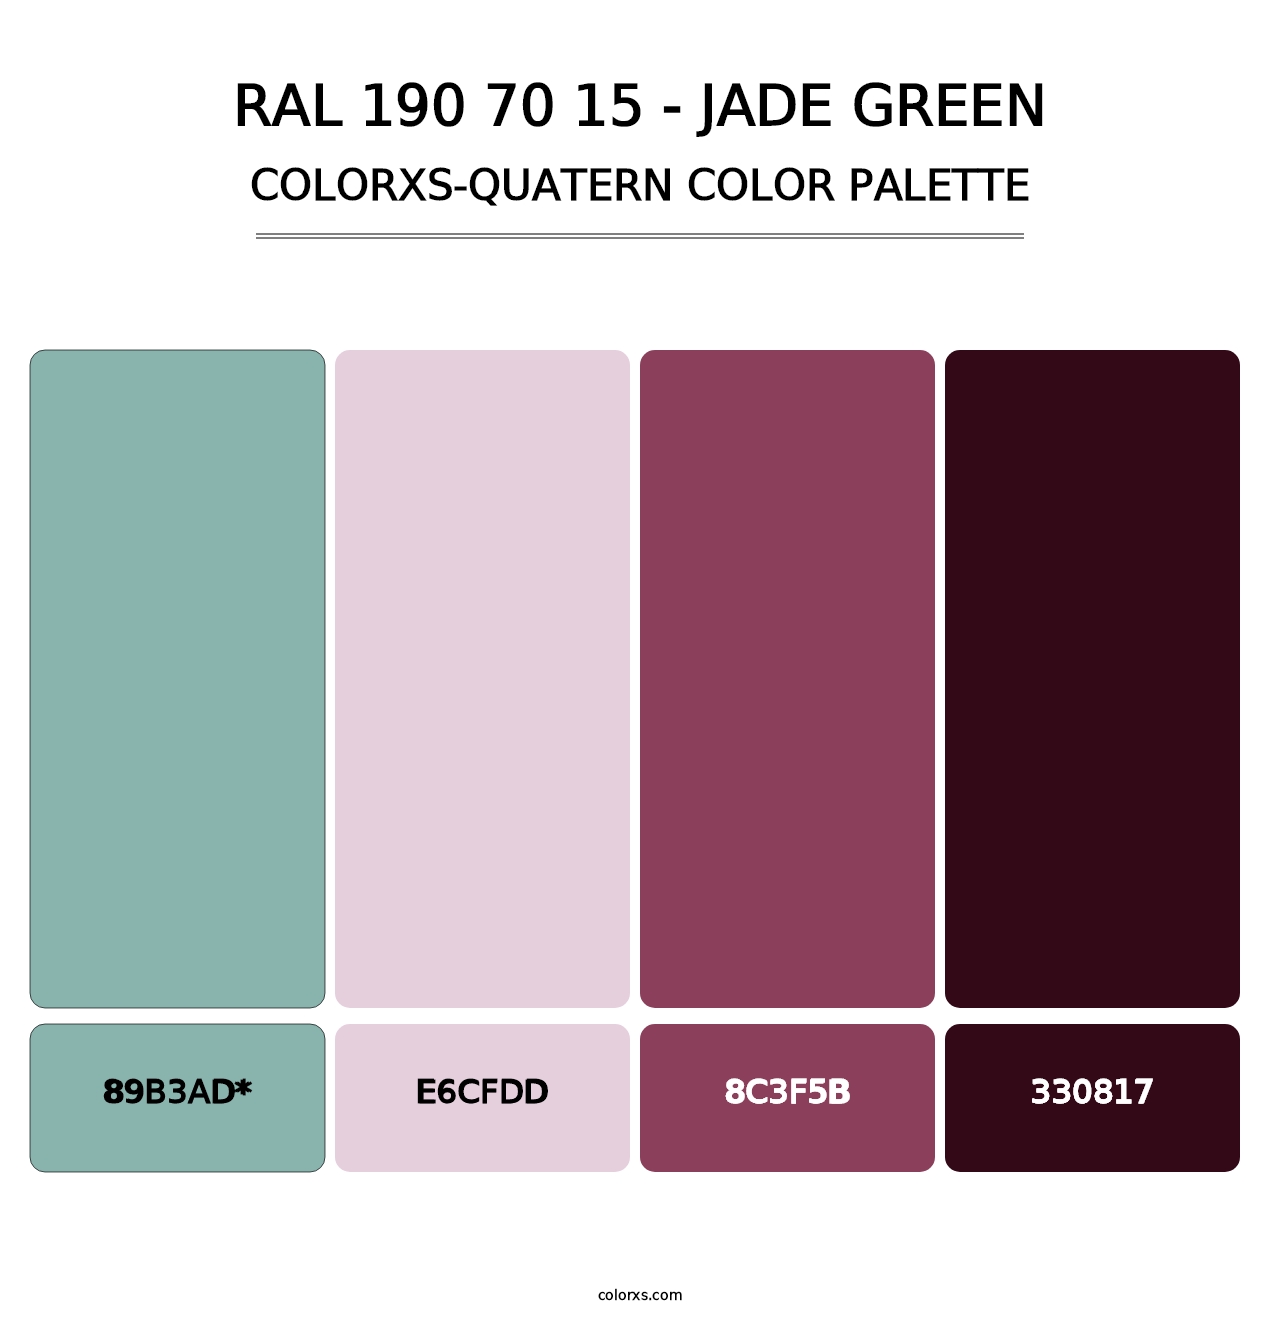 RAL 190 70 15 - Jade Green - Colorxs Quatern Palette